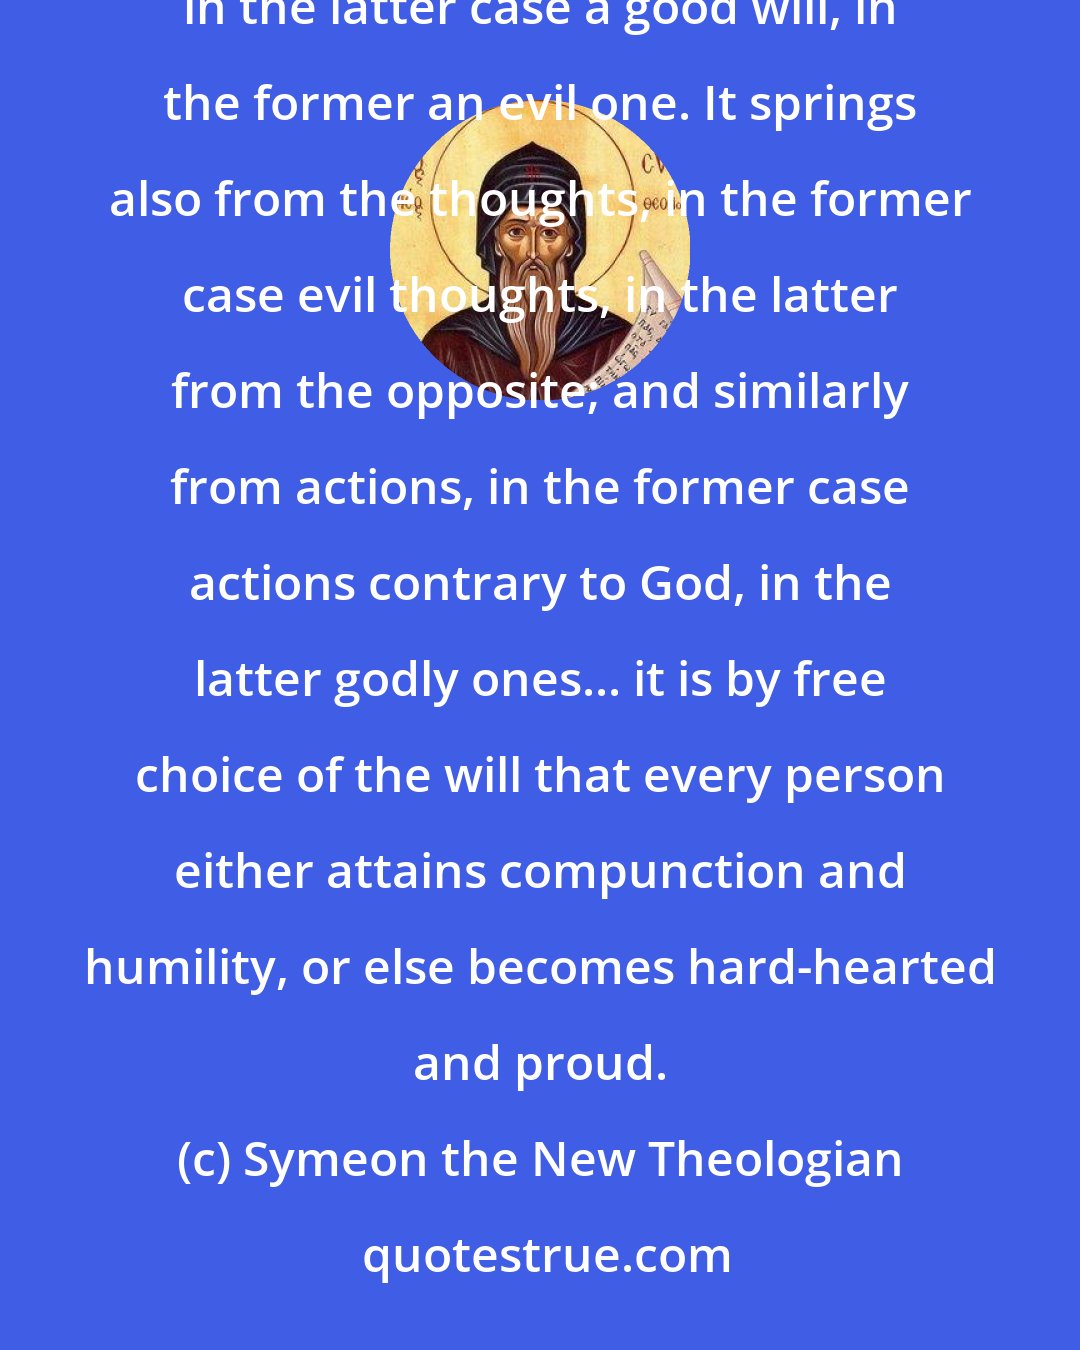 Symeon the New Theologian: What is the cause that one is hardened, and another readily moved to compunction? Listen! It springs from the will, in the latter case a good will, in the former an evil one. It springs also from the thoughts, in the former case evil thoughts, in the latter from the opposite; and similarly from actions, in the former case actions contrary to God, in the latter godly ones... it is by free choice of the will that every person either attains compunction and humility, or else becomes hard-hearted and proud.